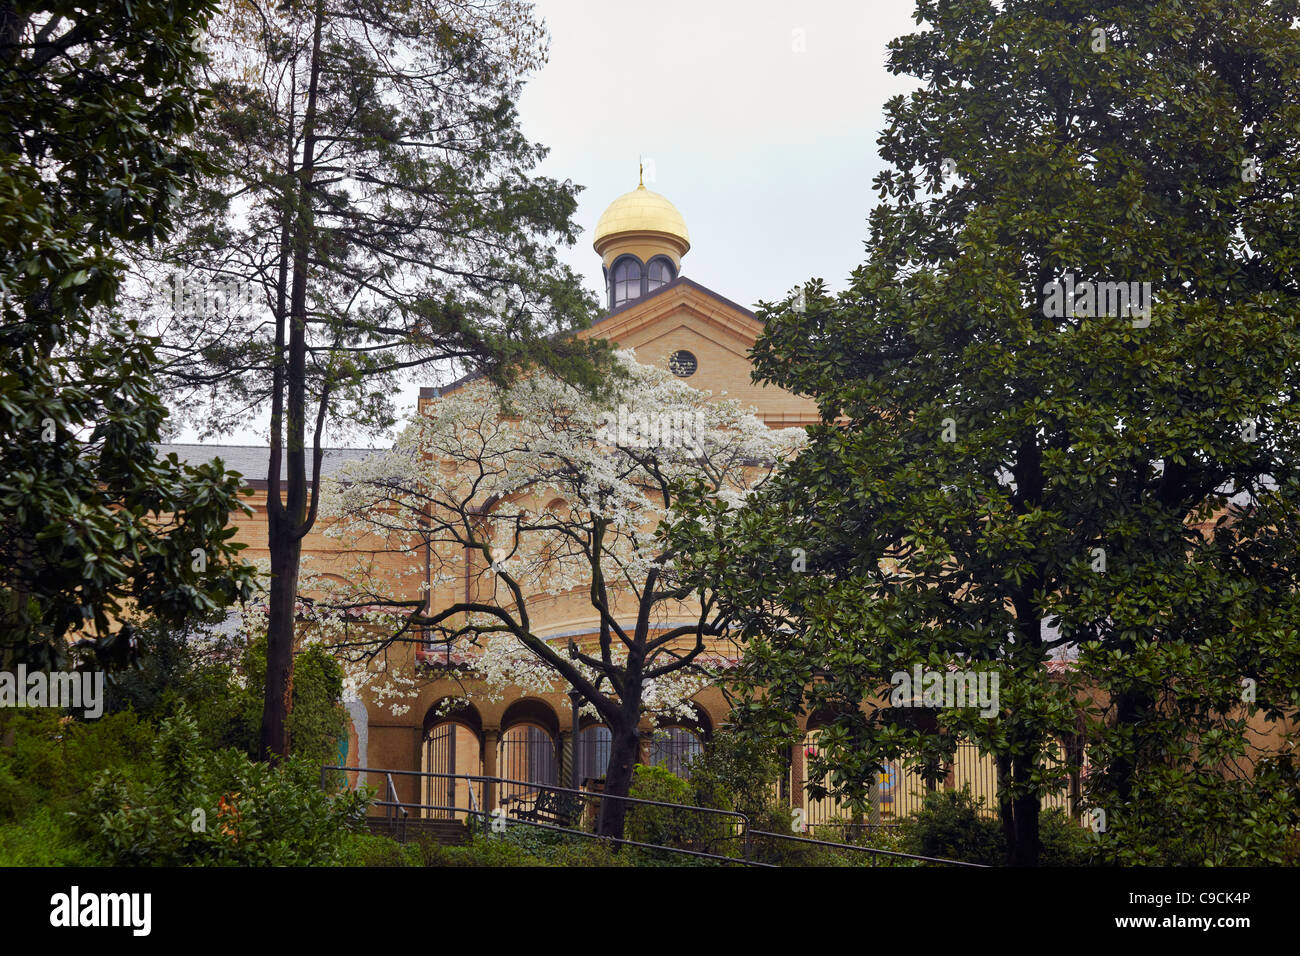 Looking up to the Franciscan Monastery from the grotto down the hill, Washington, DC. Stock Photo